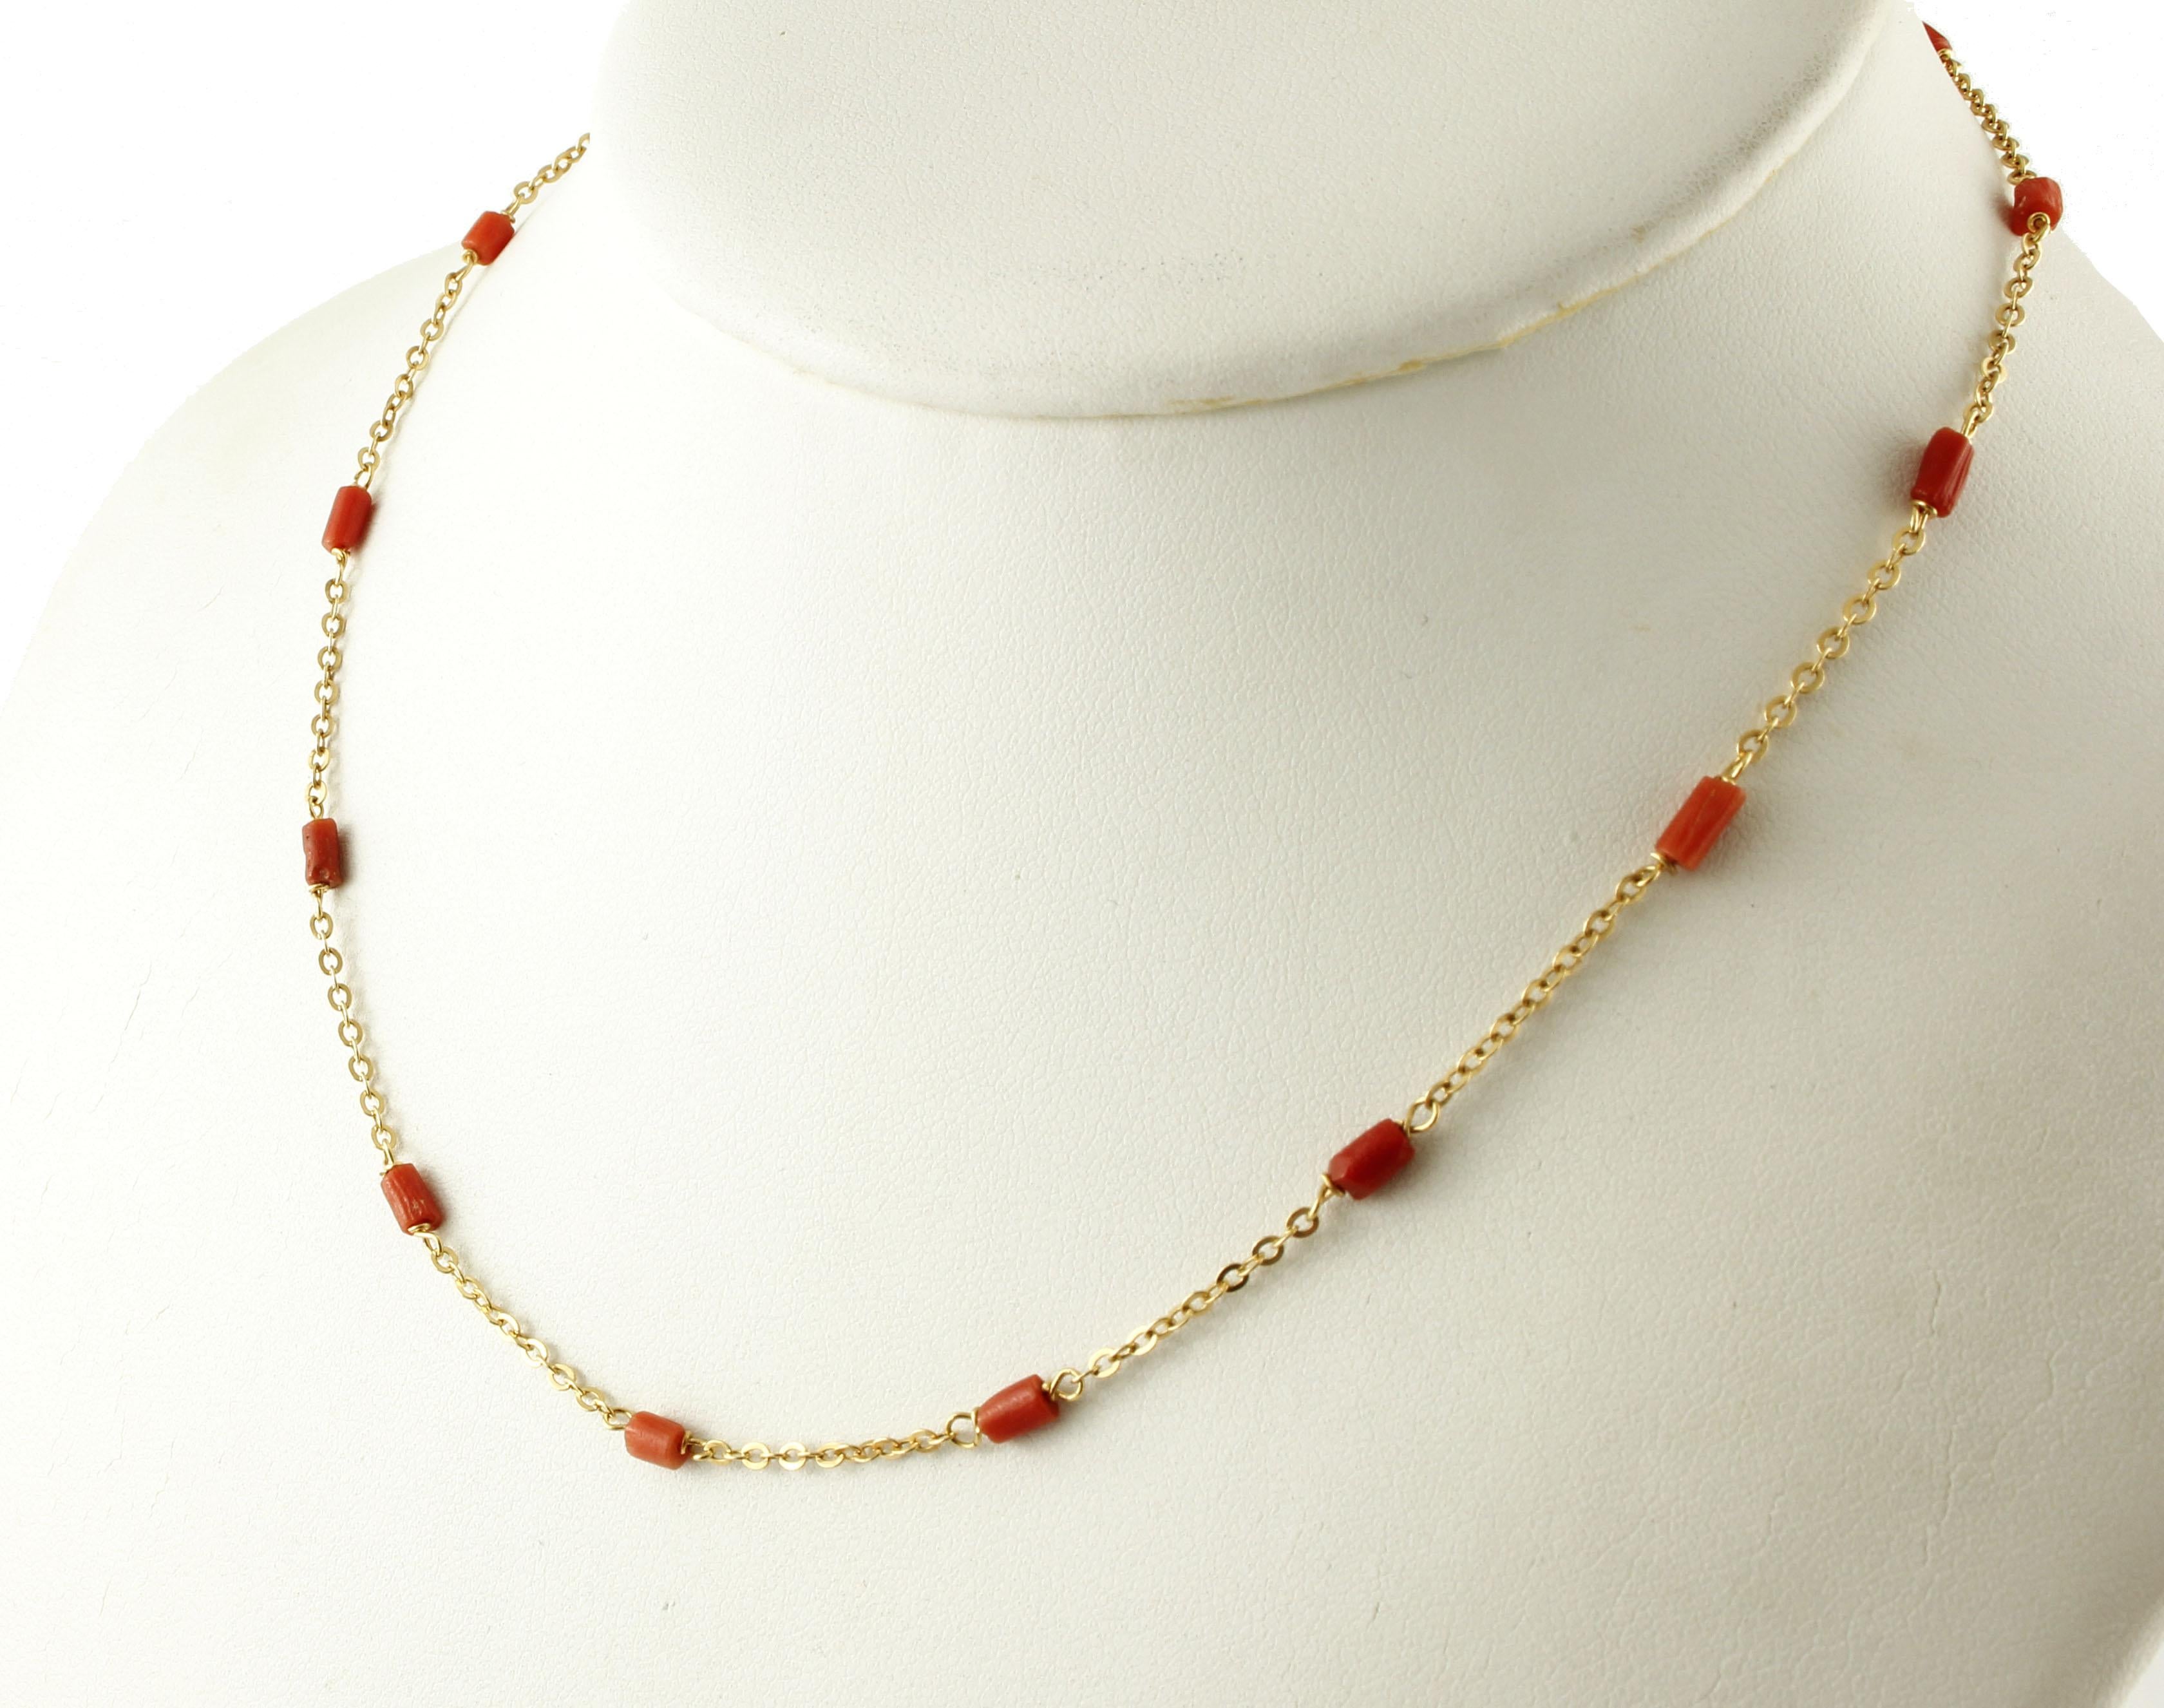 Lovely fine necklace consisting of 18k yellow gold chain and red rubrum coral decorations. 
This necklace is totally handmade by Italian master goldsmiths
Coral 1.05 g
Total weight 3.8 g
Length 38 cm
RF + IRC

For any enquires, please contact the